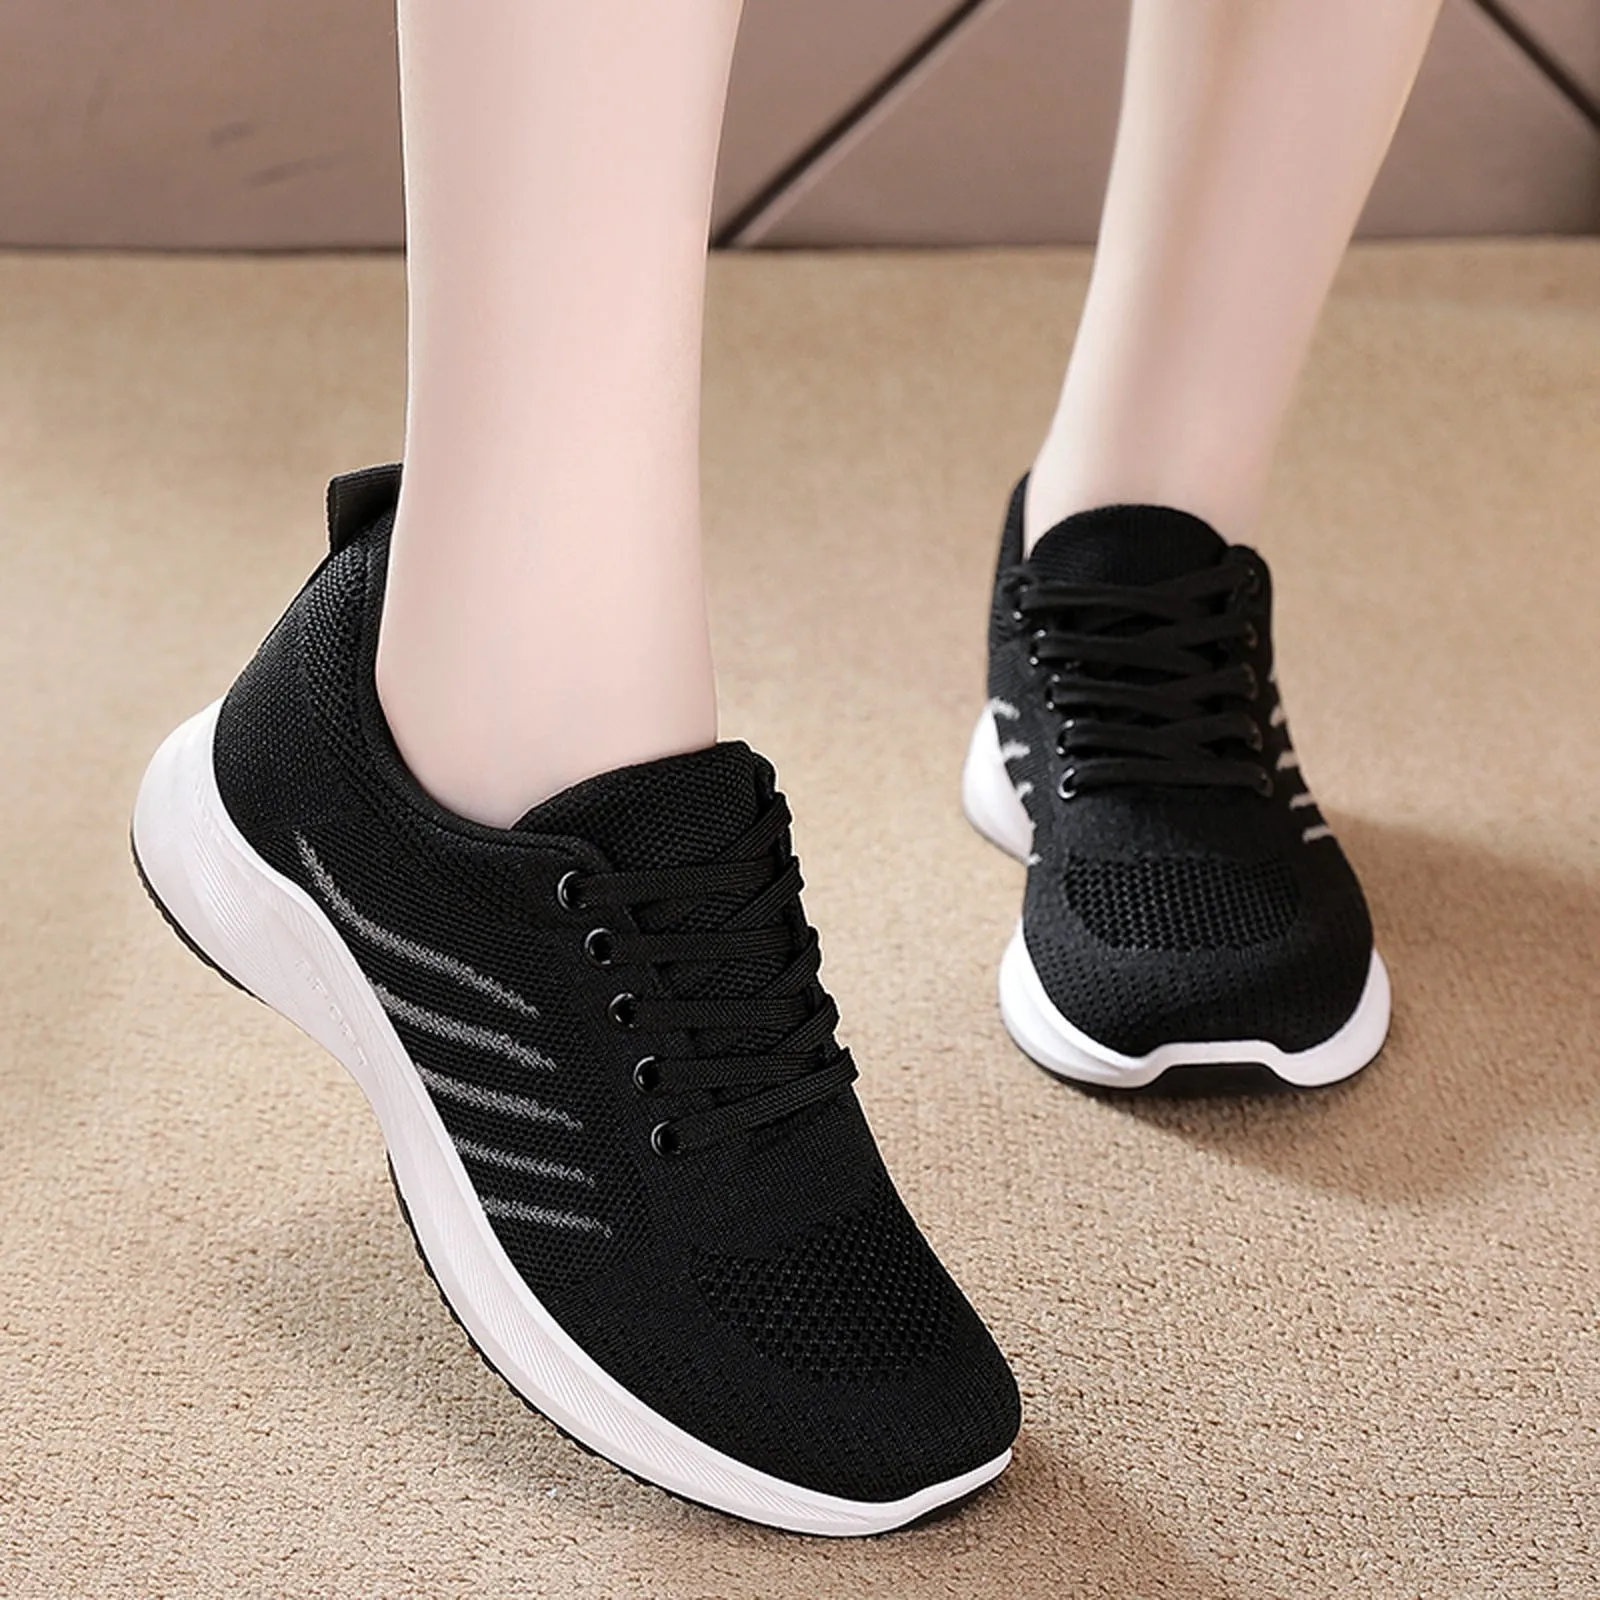 Tdoor mesh lace up sports shoes runing breathable shoes sneakers sports shoes for women thumb200